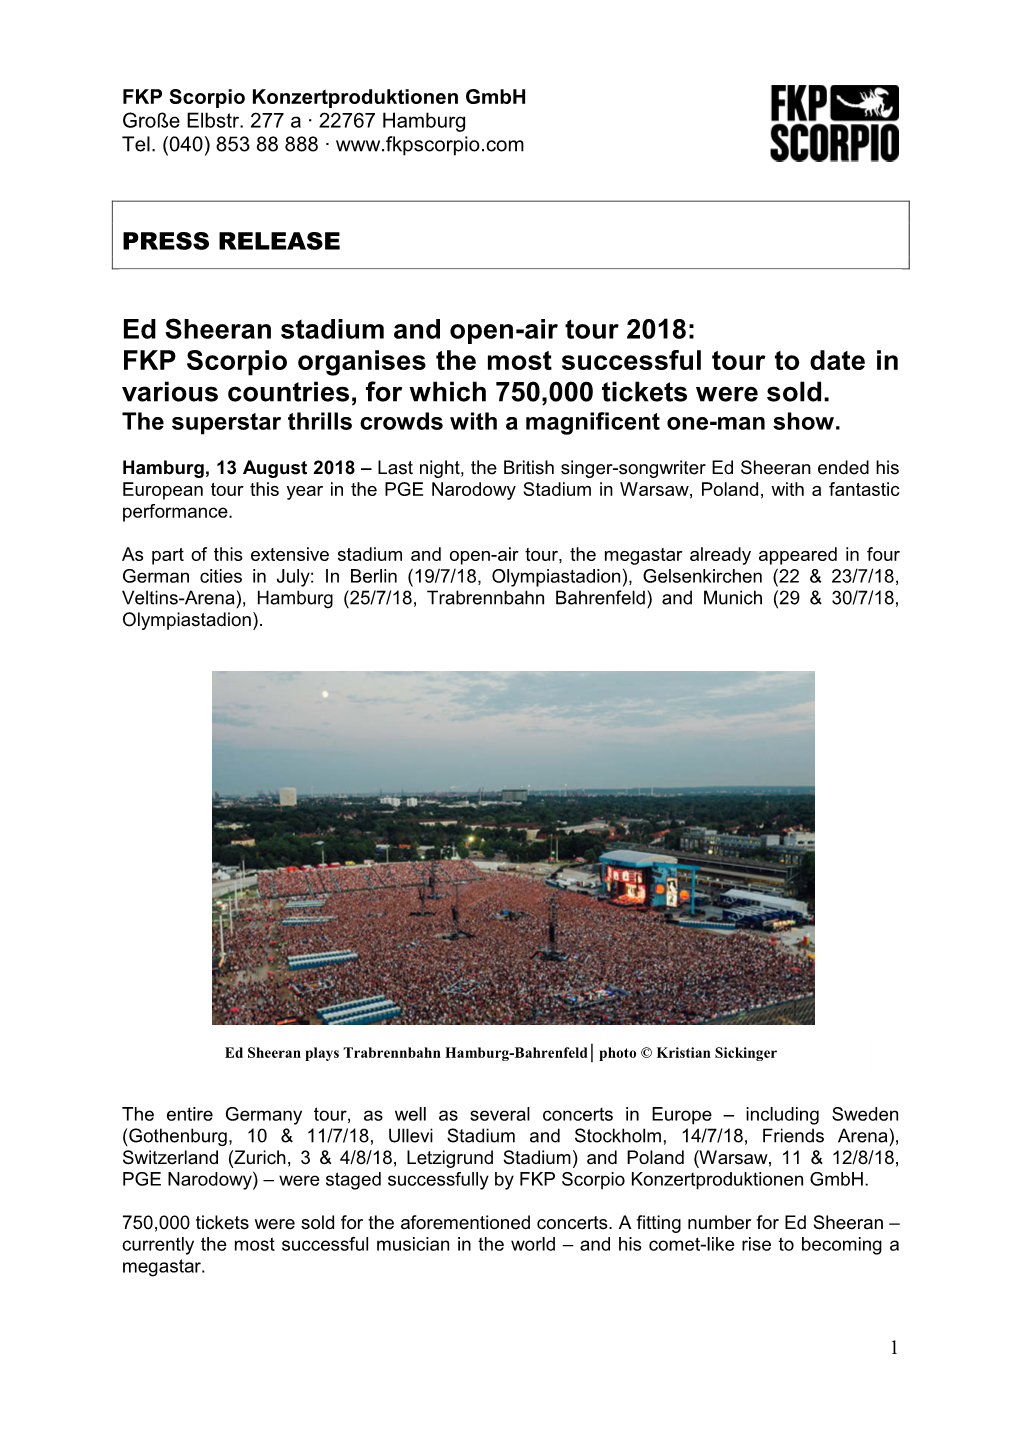 Ed Sheeran Stadium and Open-Air Tour 2018: FKP Scorpio Organises the Most Successful Tour to Date in Various Countries, for Which 750,000 Tickets Were Sold